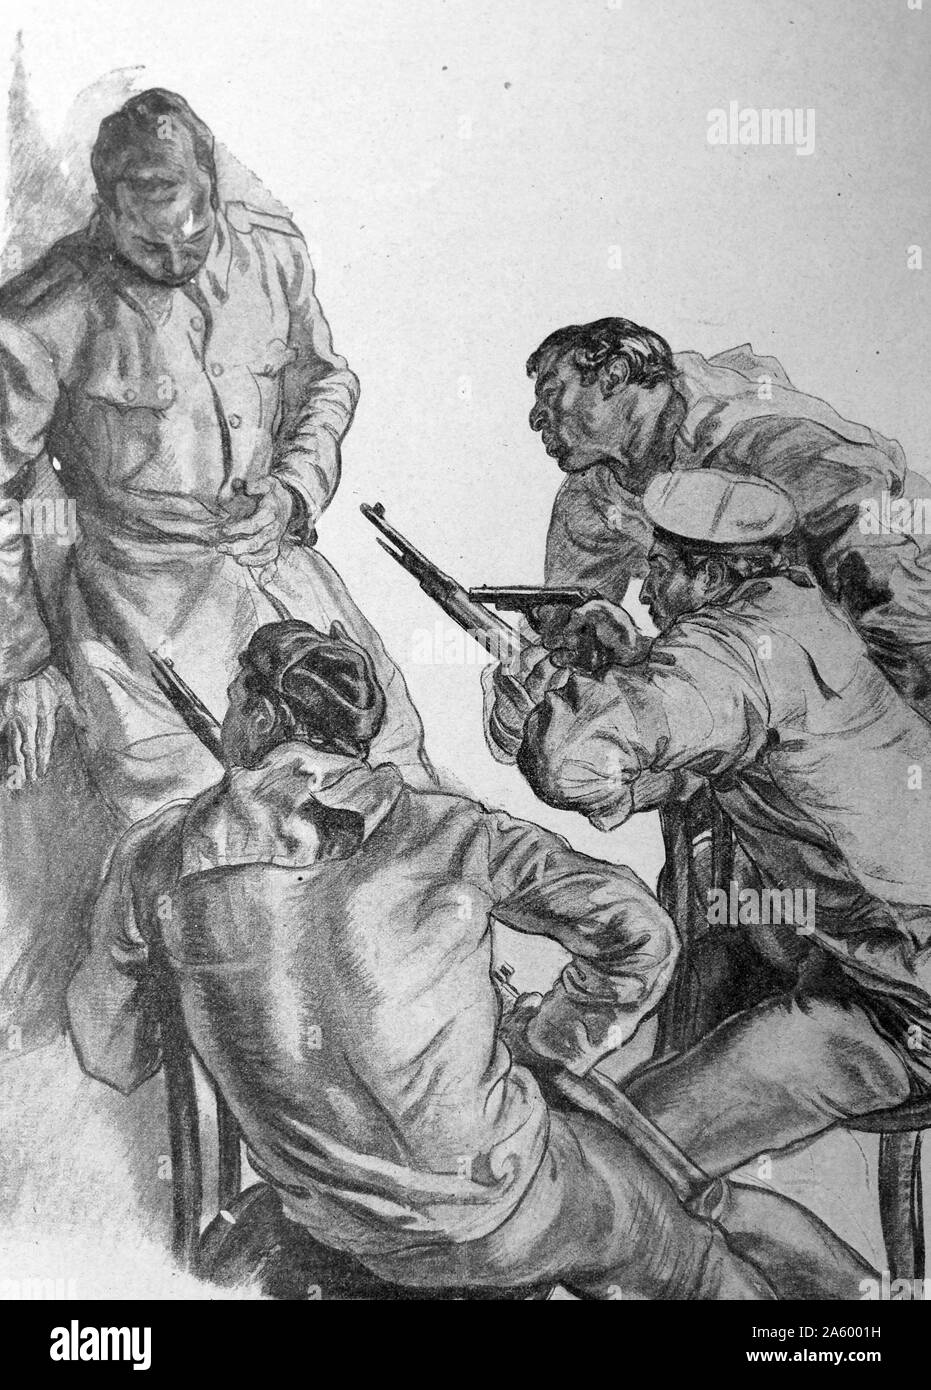 Propaganda illustration by Carlos Saenz De Tejada depicting a naval officer being shot by Republican mutineers, during the Spanish Civil War. Dated 1938 Stock Photo